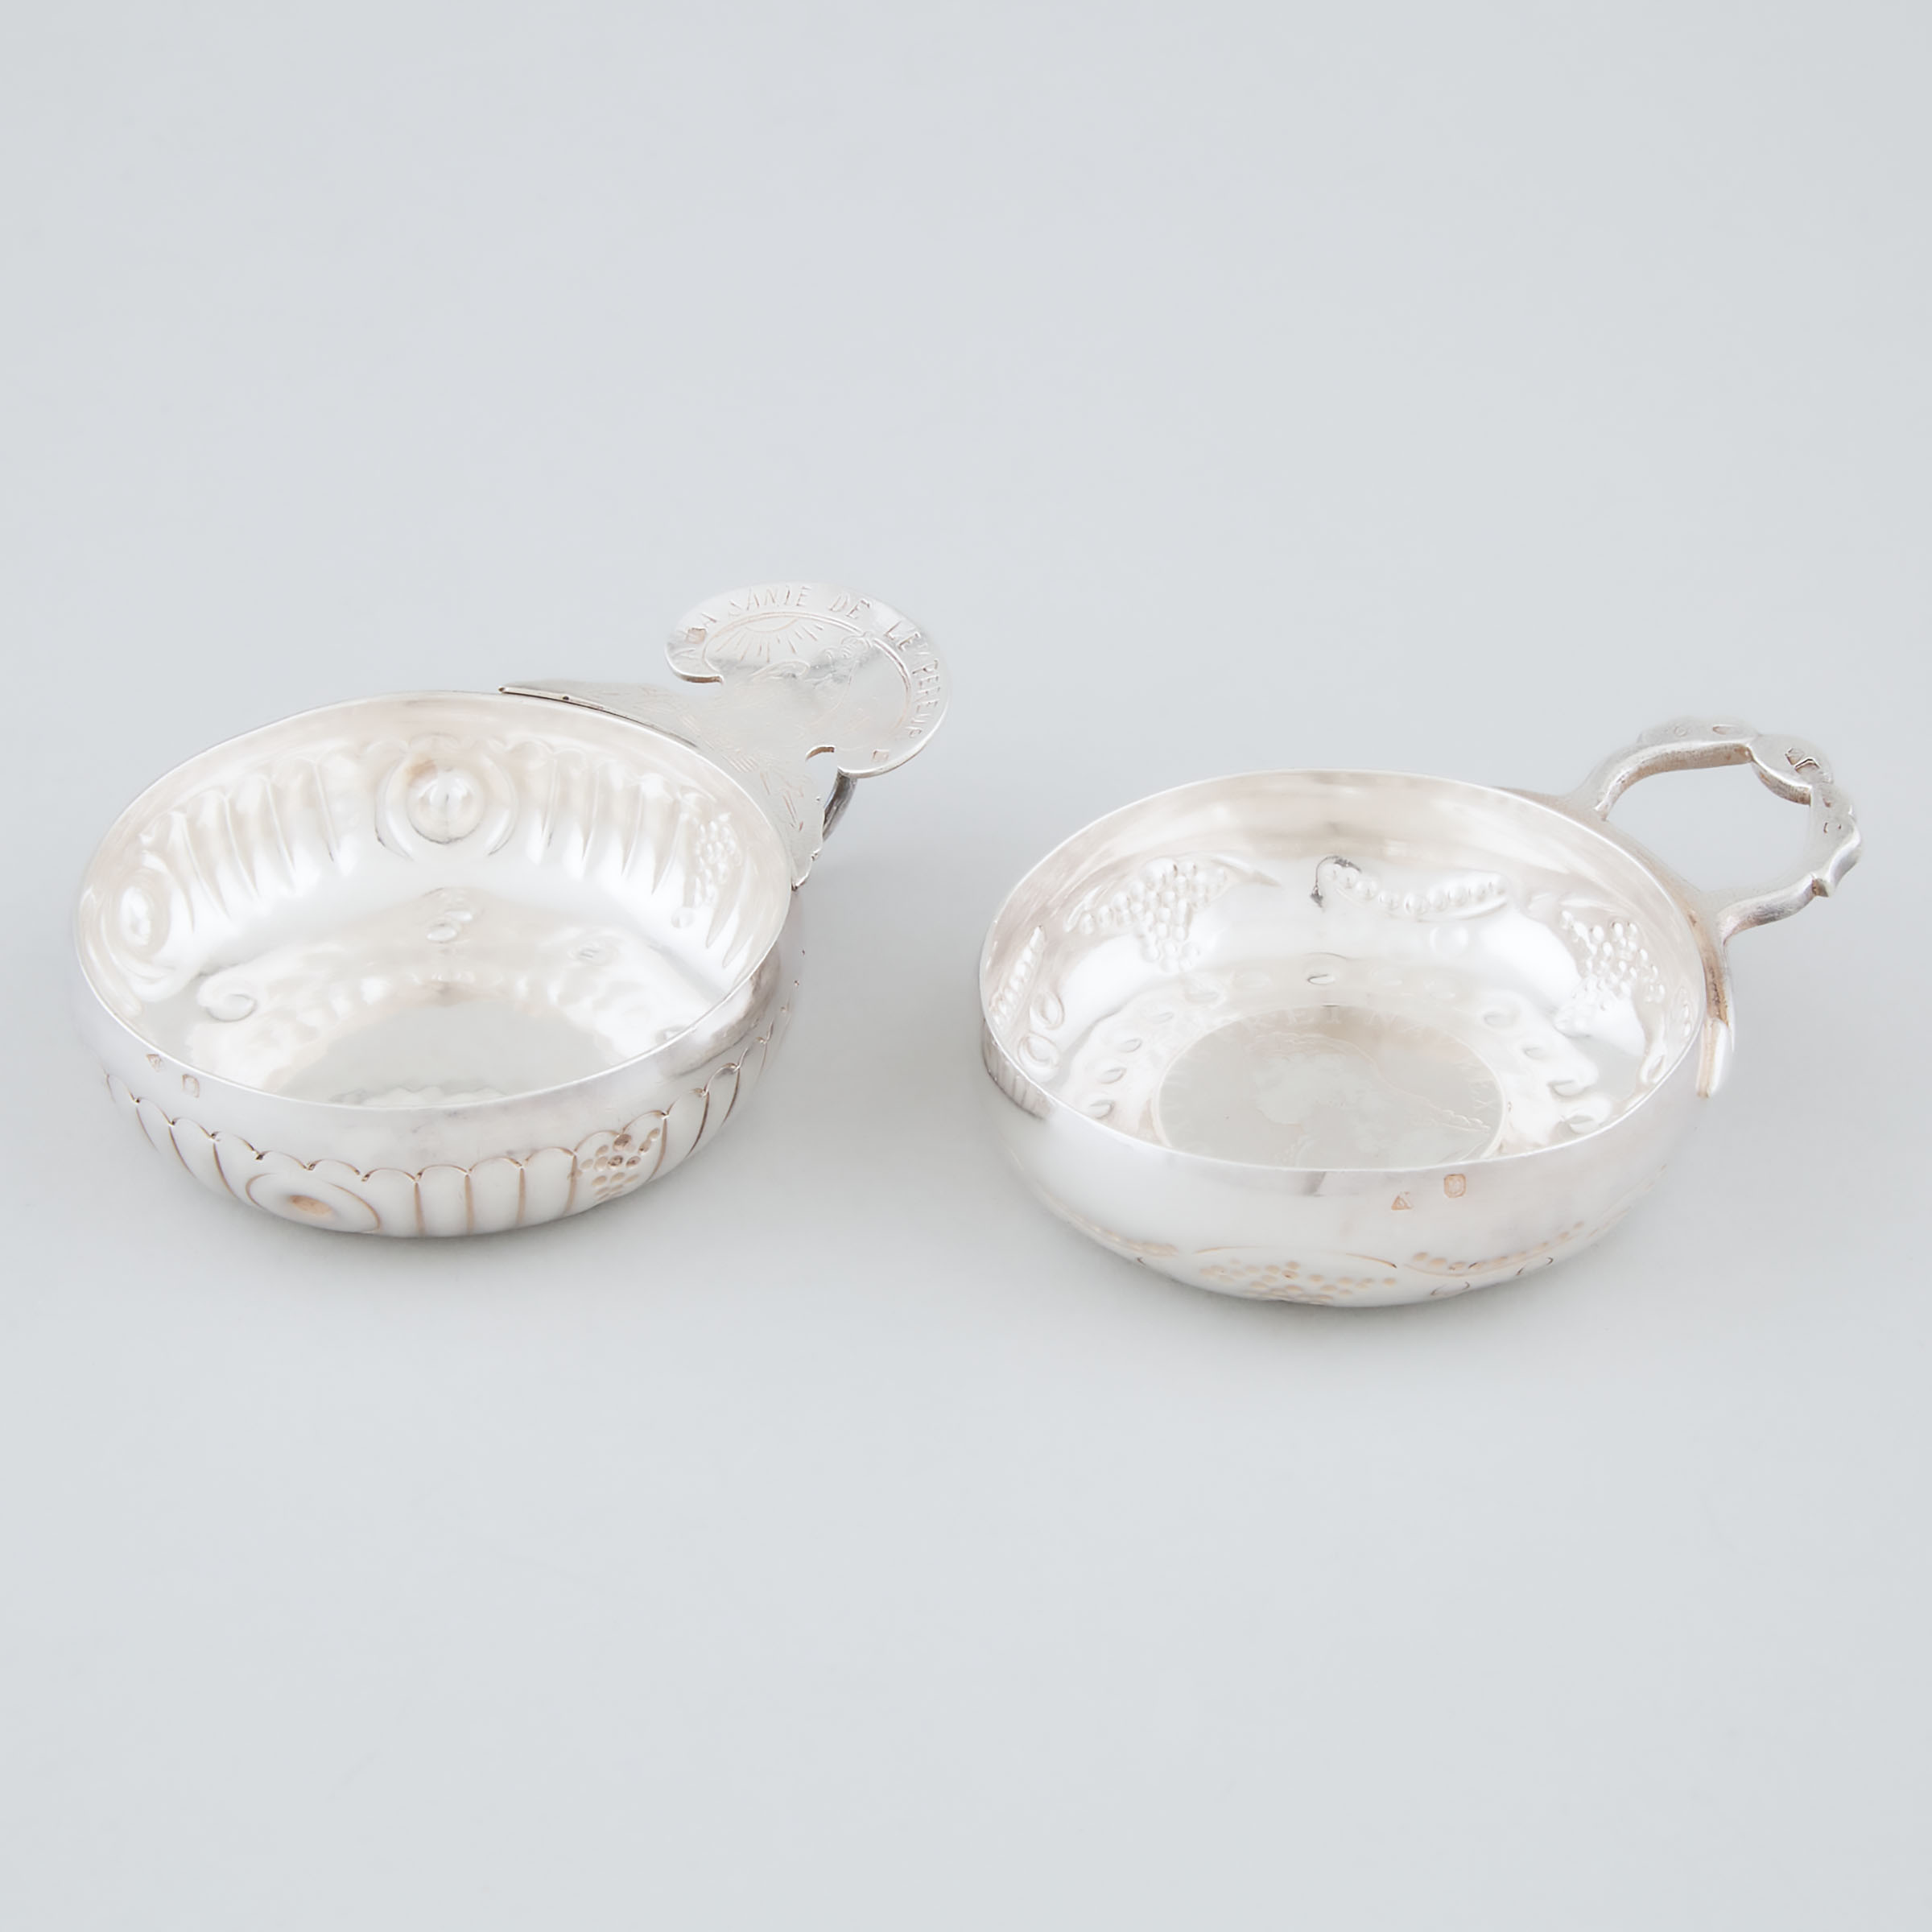 Two French Silver Wine Tasters, Marc Parrod, Dijon, early 20th century